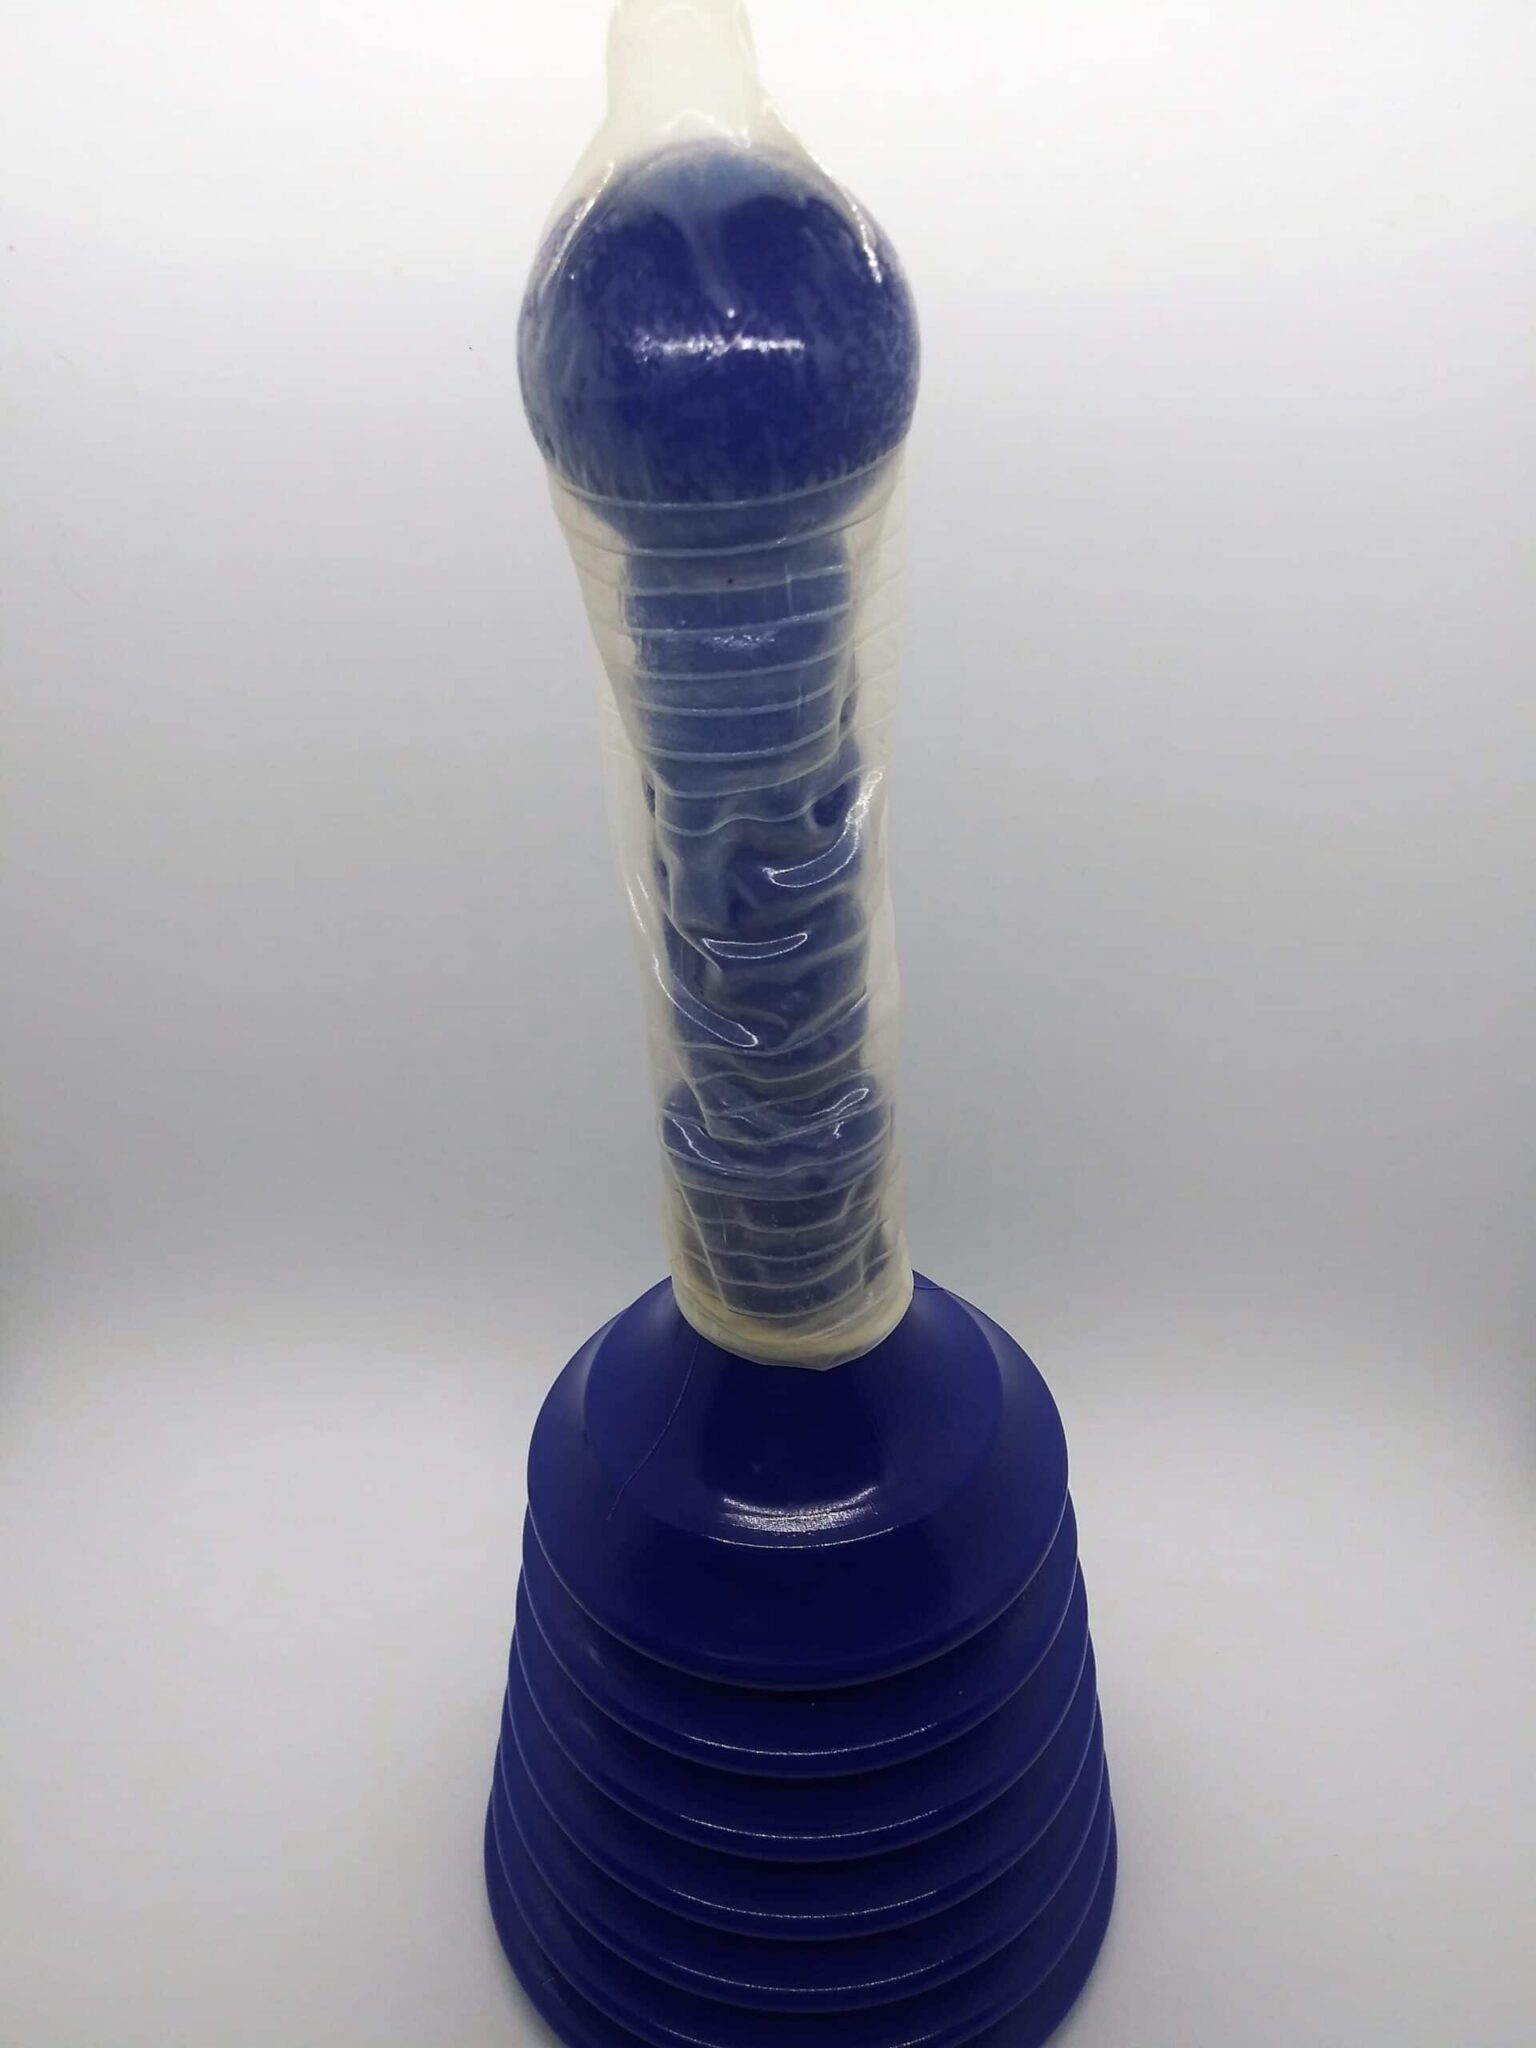 DIY anal sex toys, photo of a blue accordion style sink plunger with a condom covering the handle.